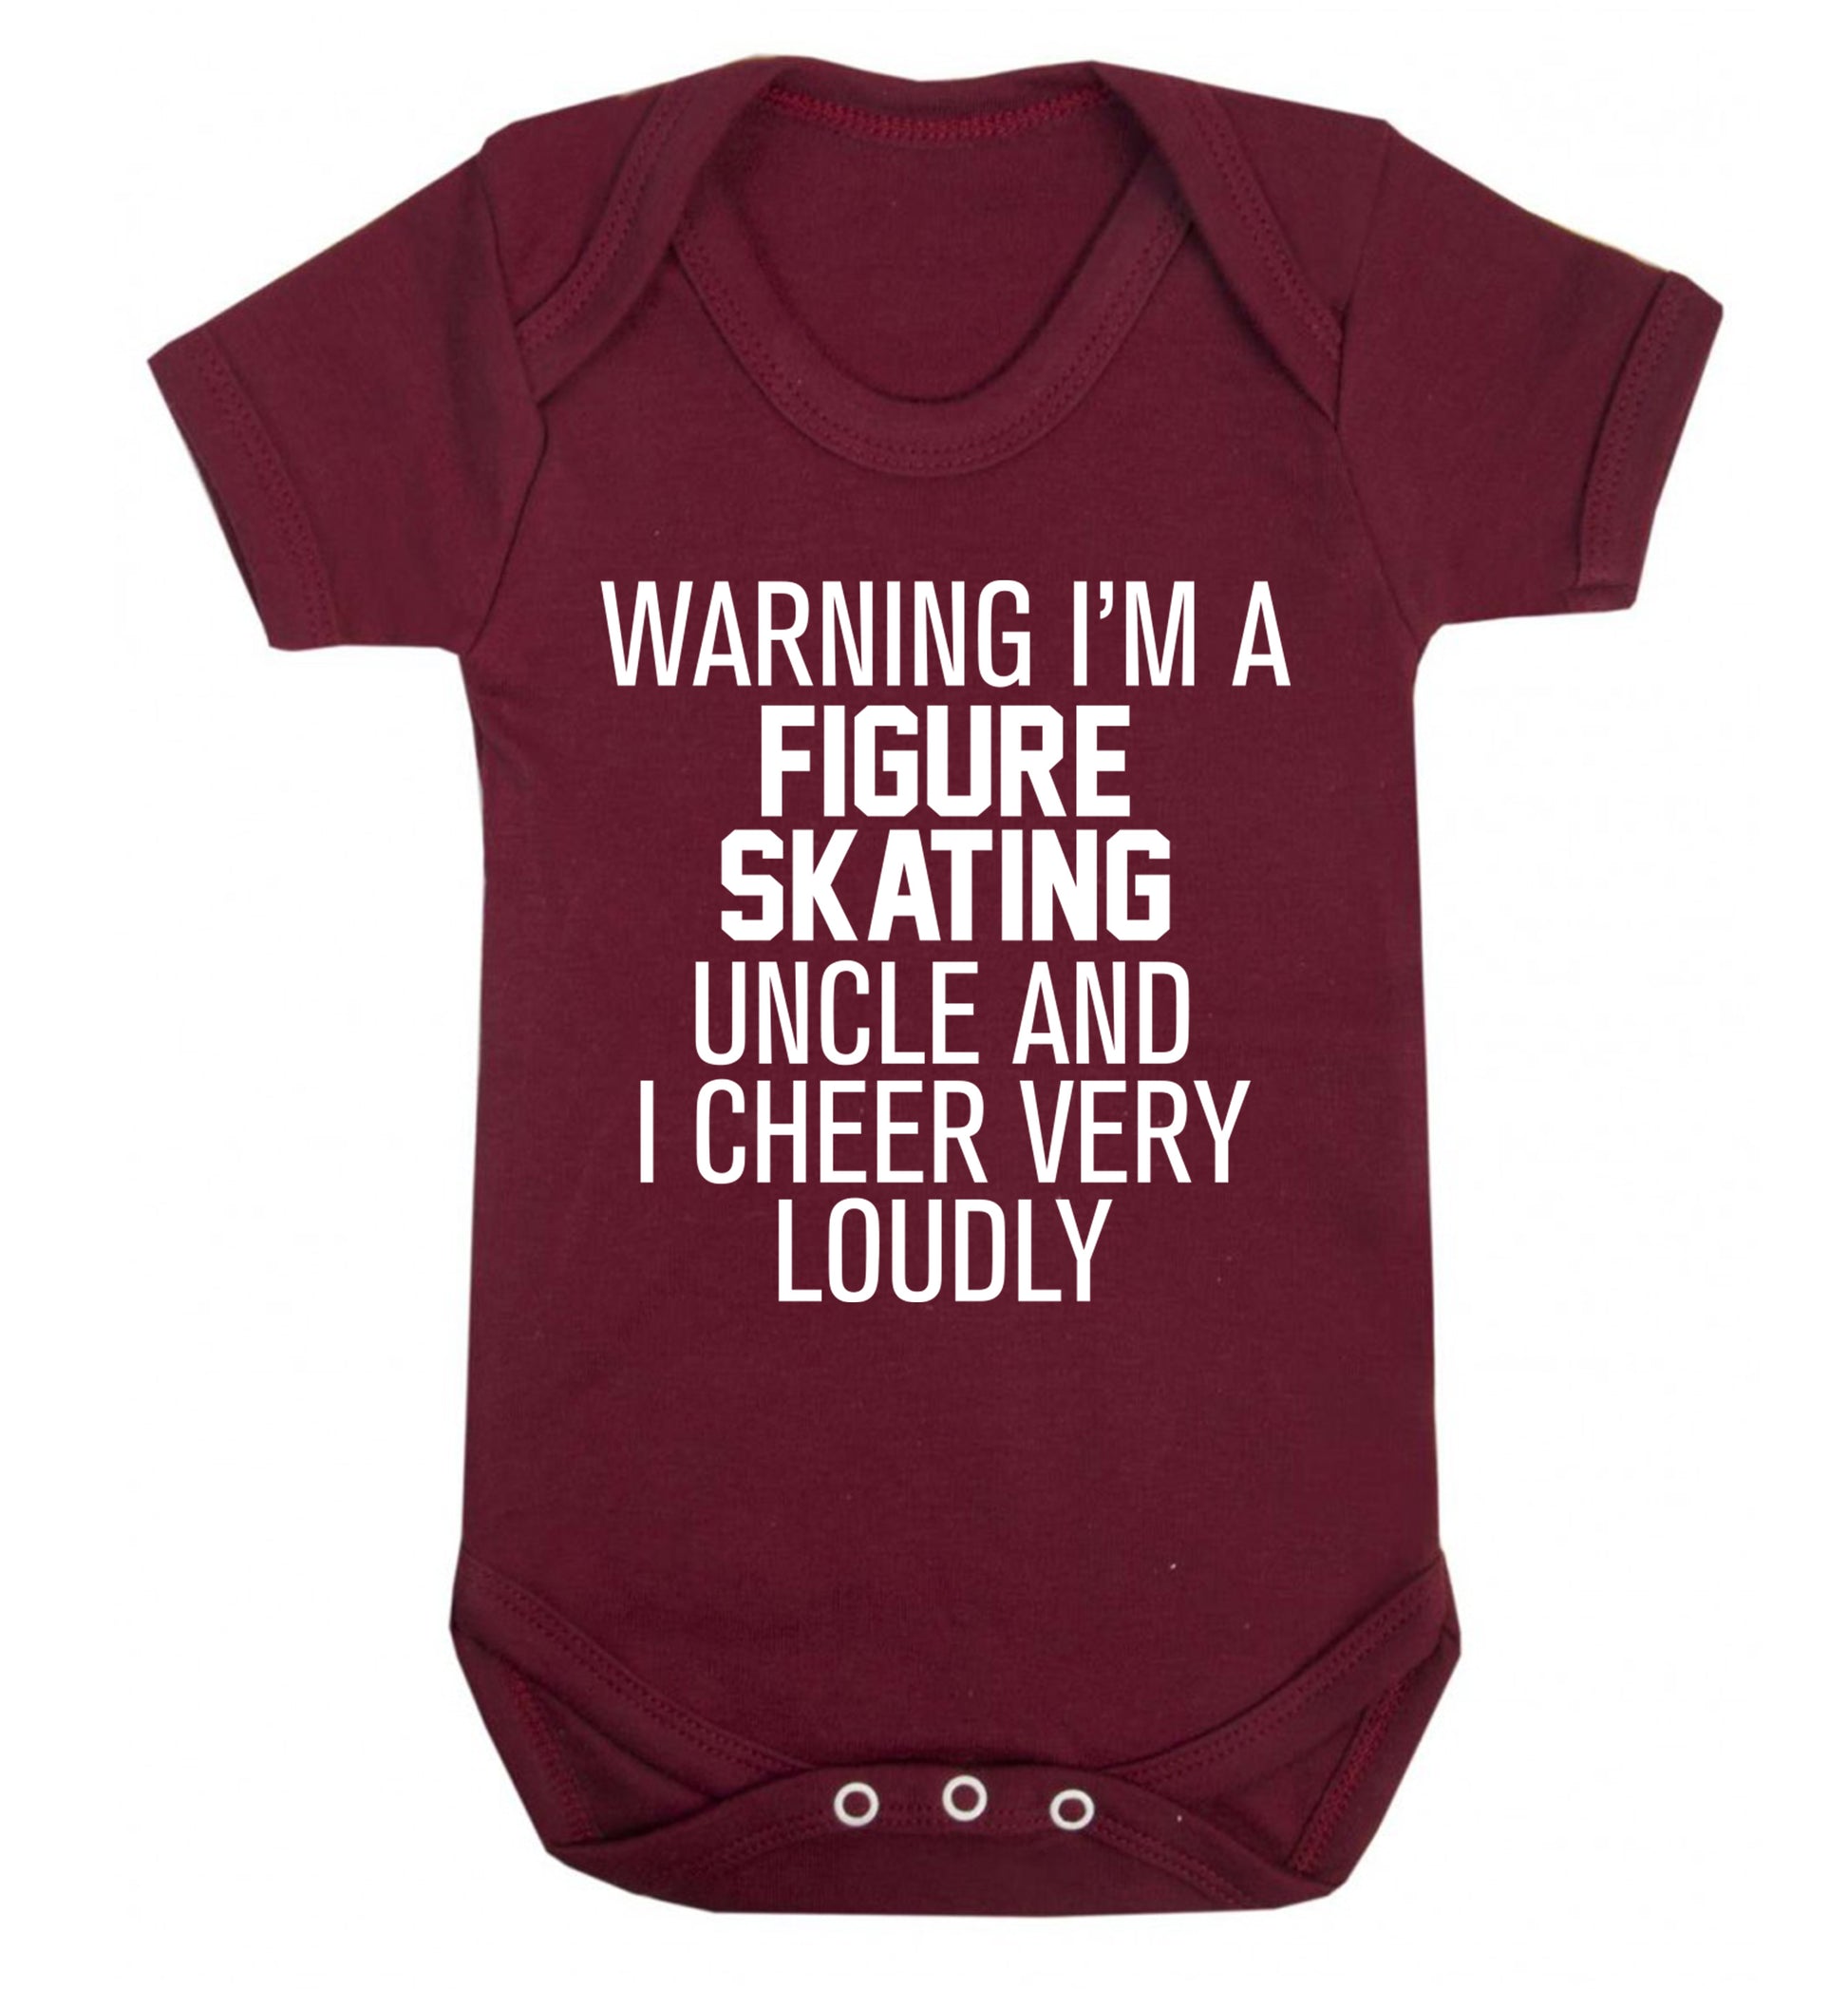 Warning I'm a figure skating uncle and I cheer very loudly Baby Vest maroon 18-24 months